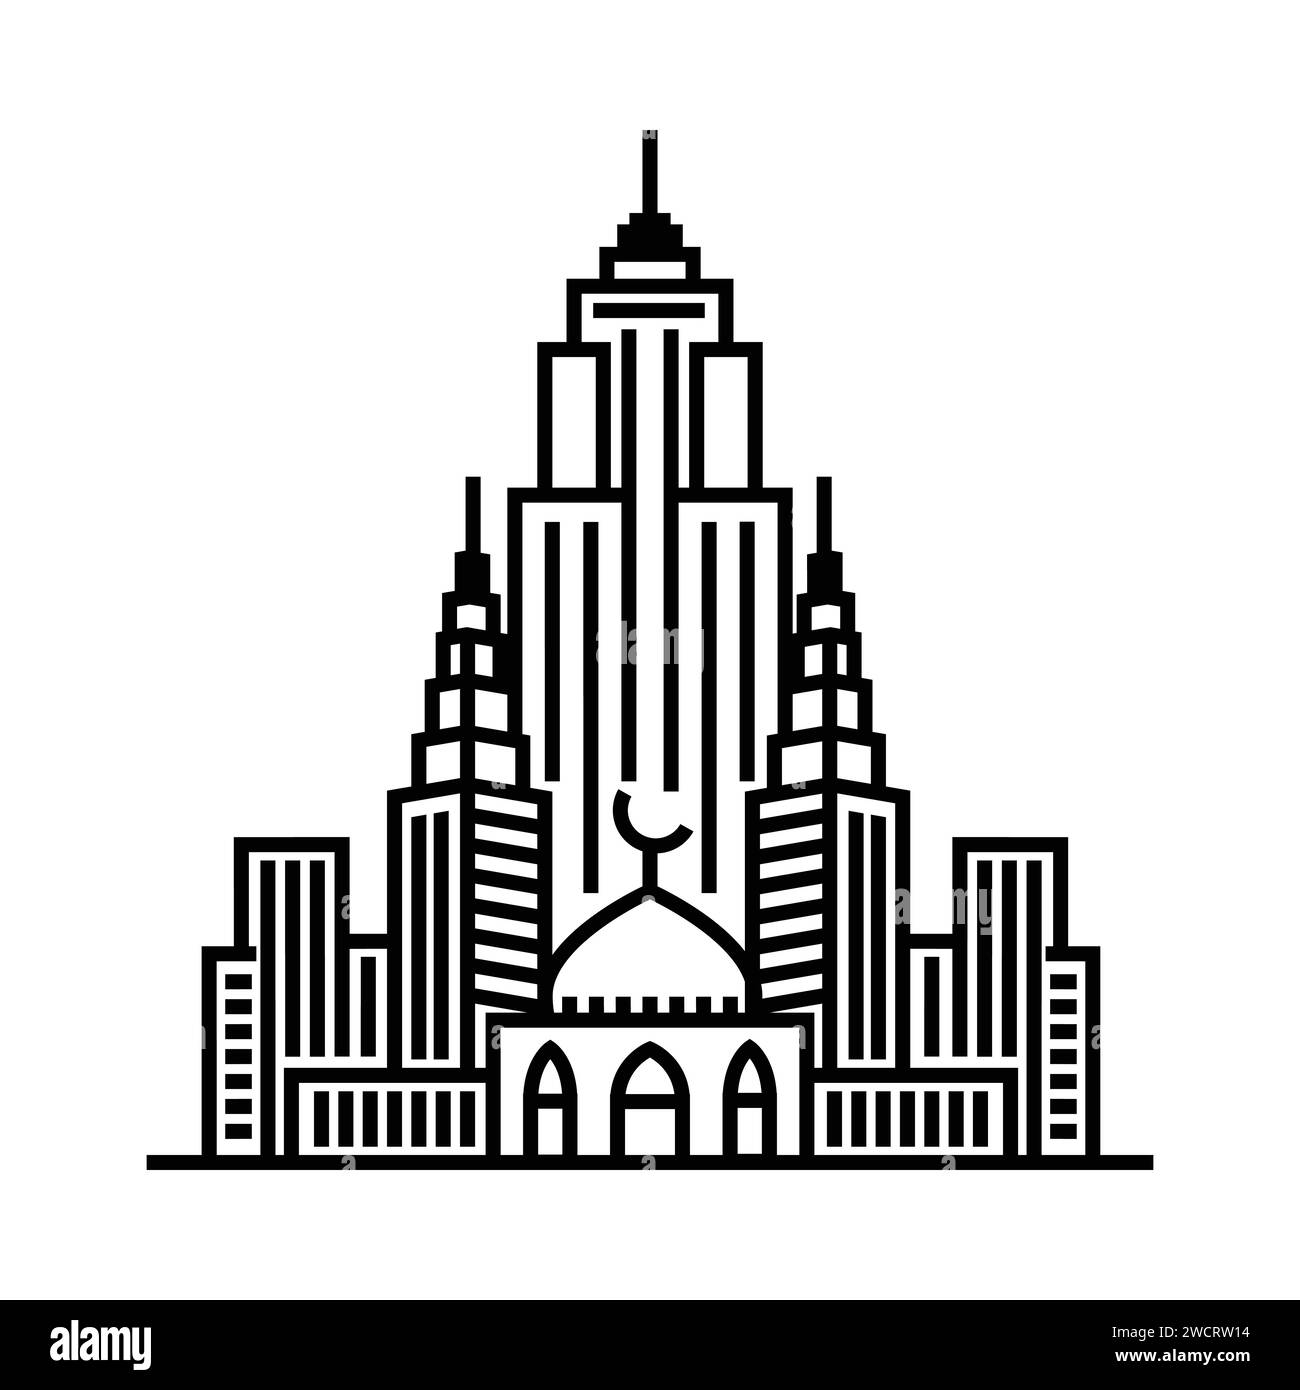 Mosque and city skyline black silhouette isolated on white background. Vector illustration Stock Vector